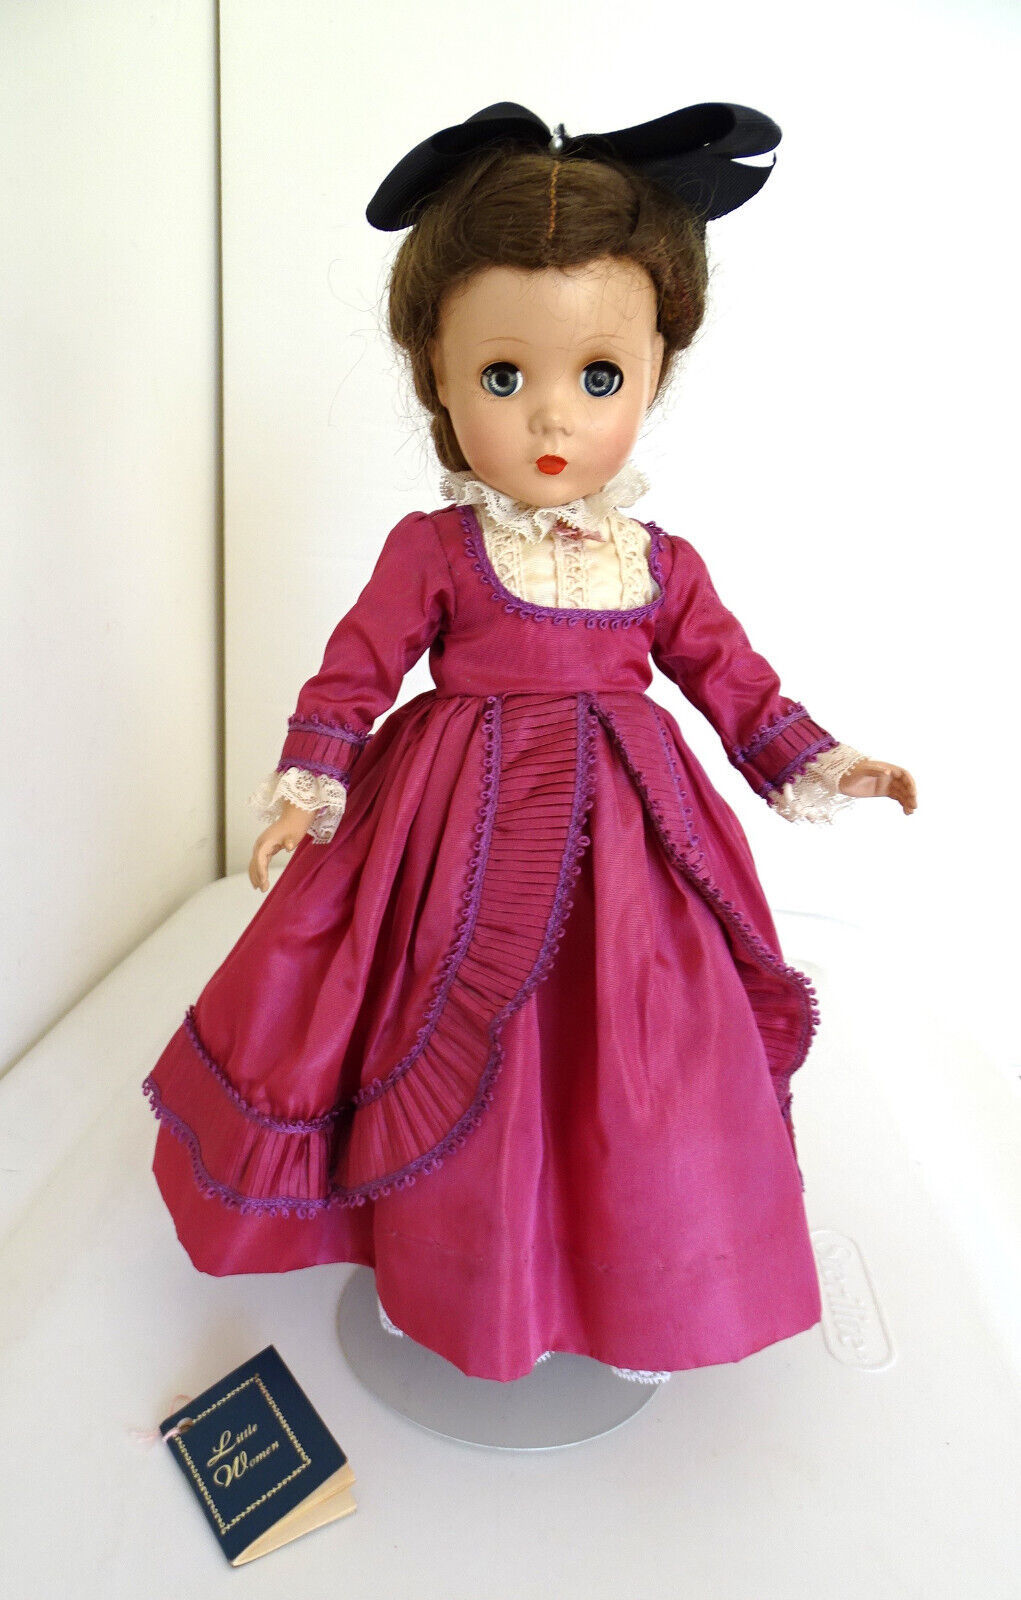 Vintage 1950's Alexander 14" Maggie Face Hard Plastic in Little Woman Outfit - $95.00